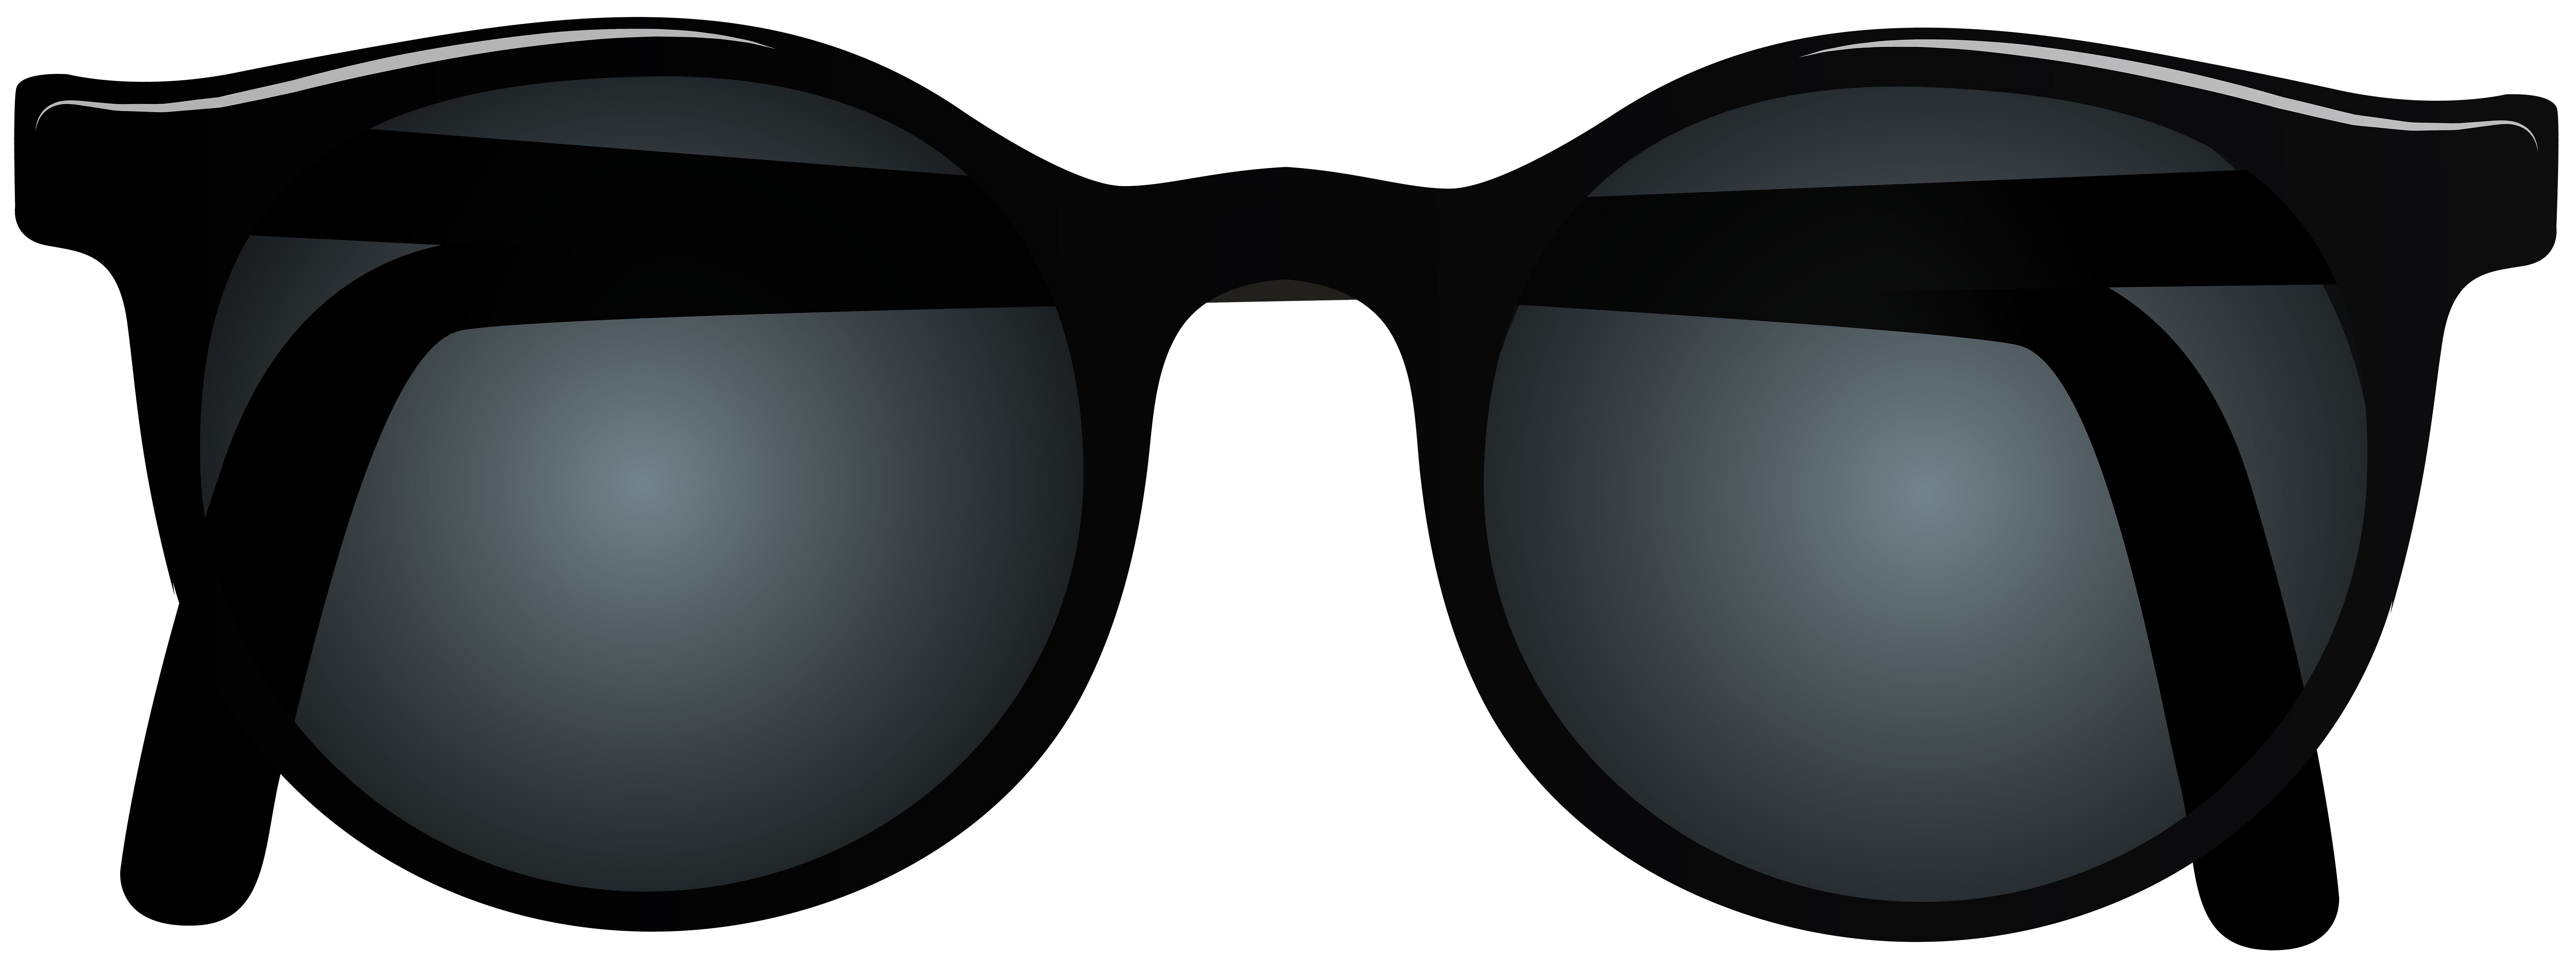 Black Sunglasses PNG Clipart Image | Gallery Yopriceville - High ...